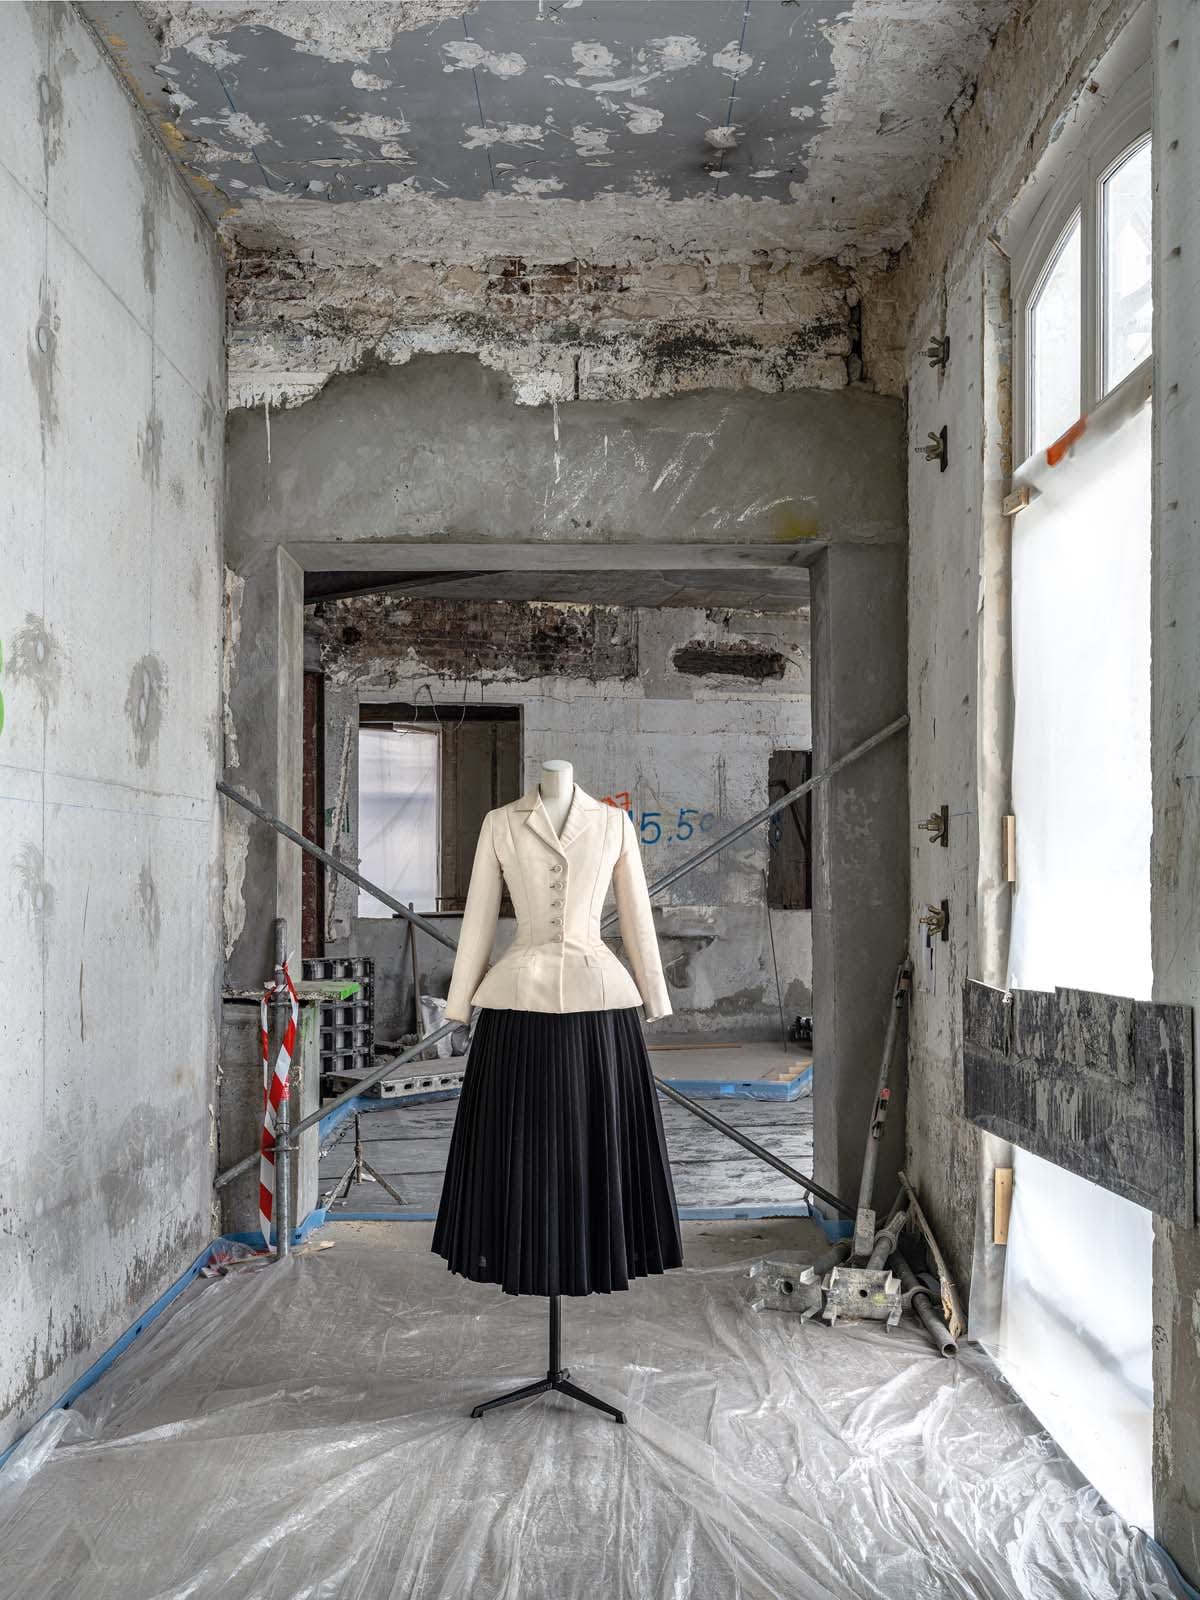 Christian Dior blazer and skirt on bust in Dior Montaigne Ave flagship during reconstruction by Robert Polidori